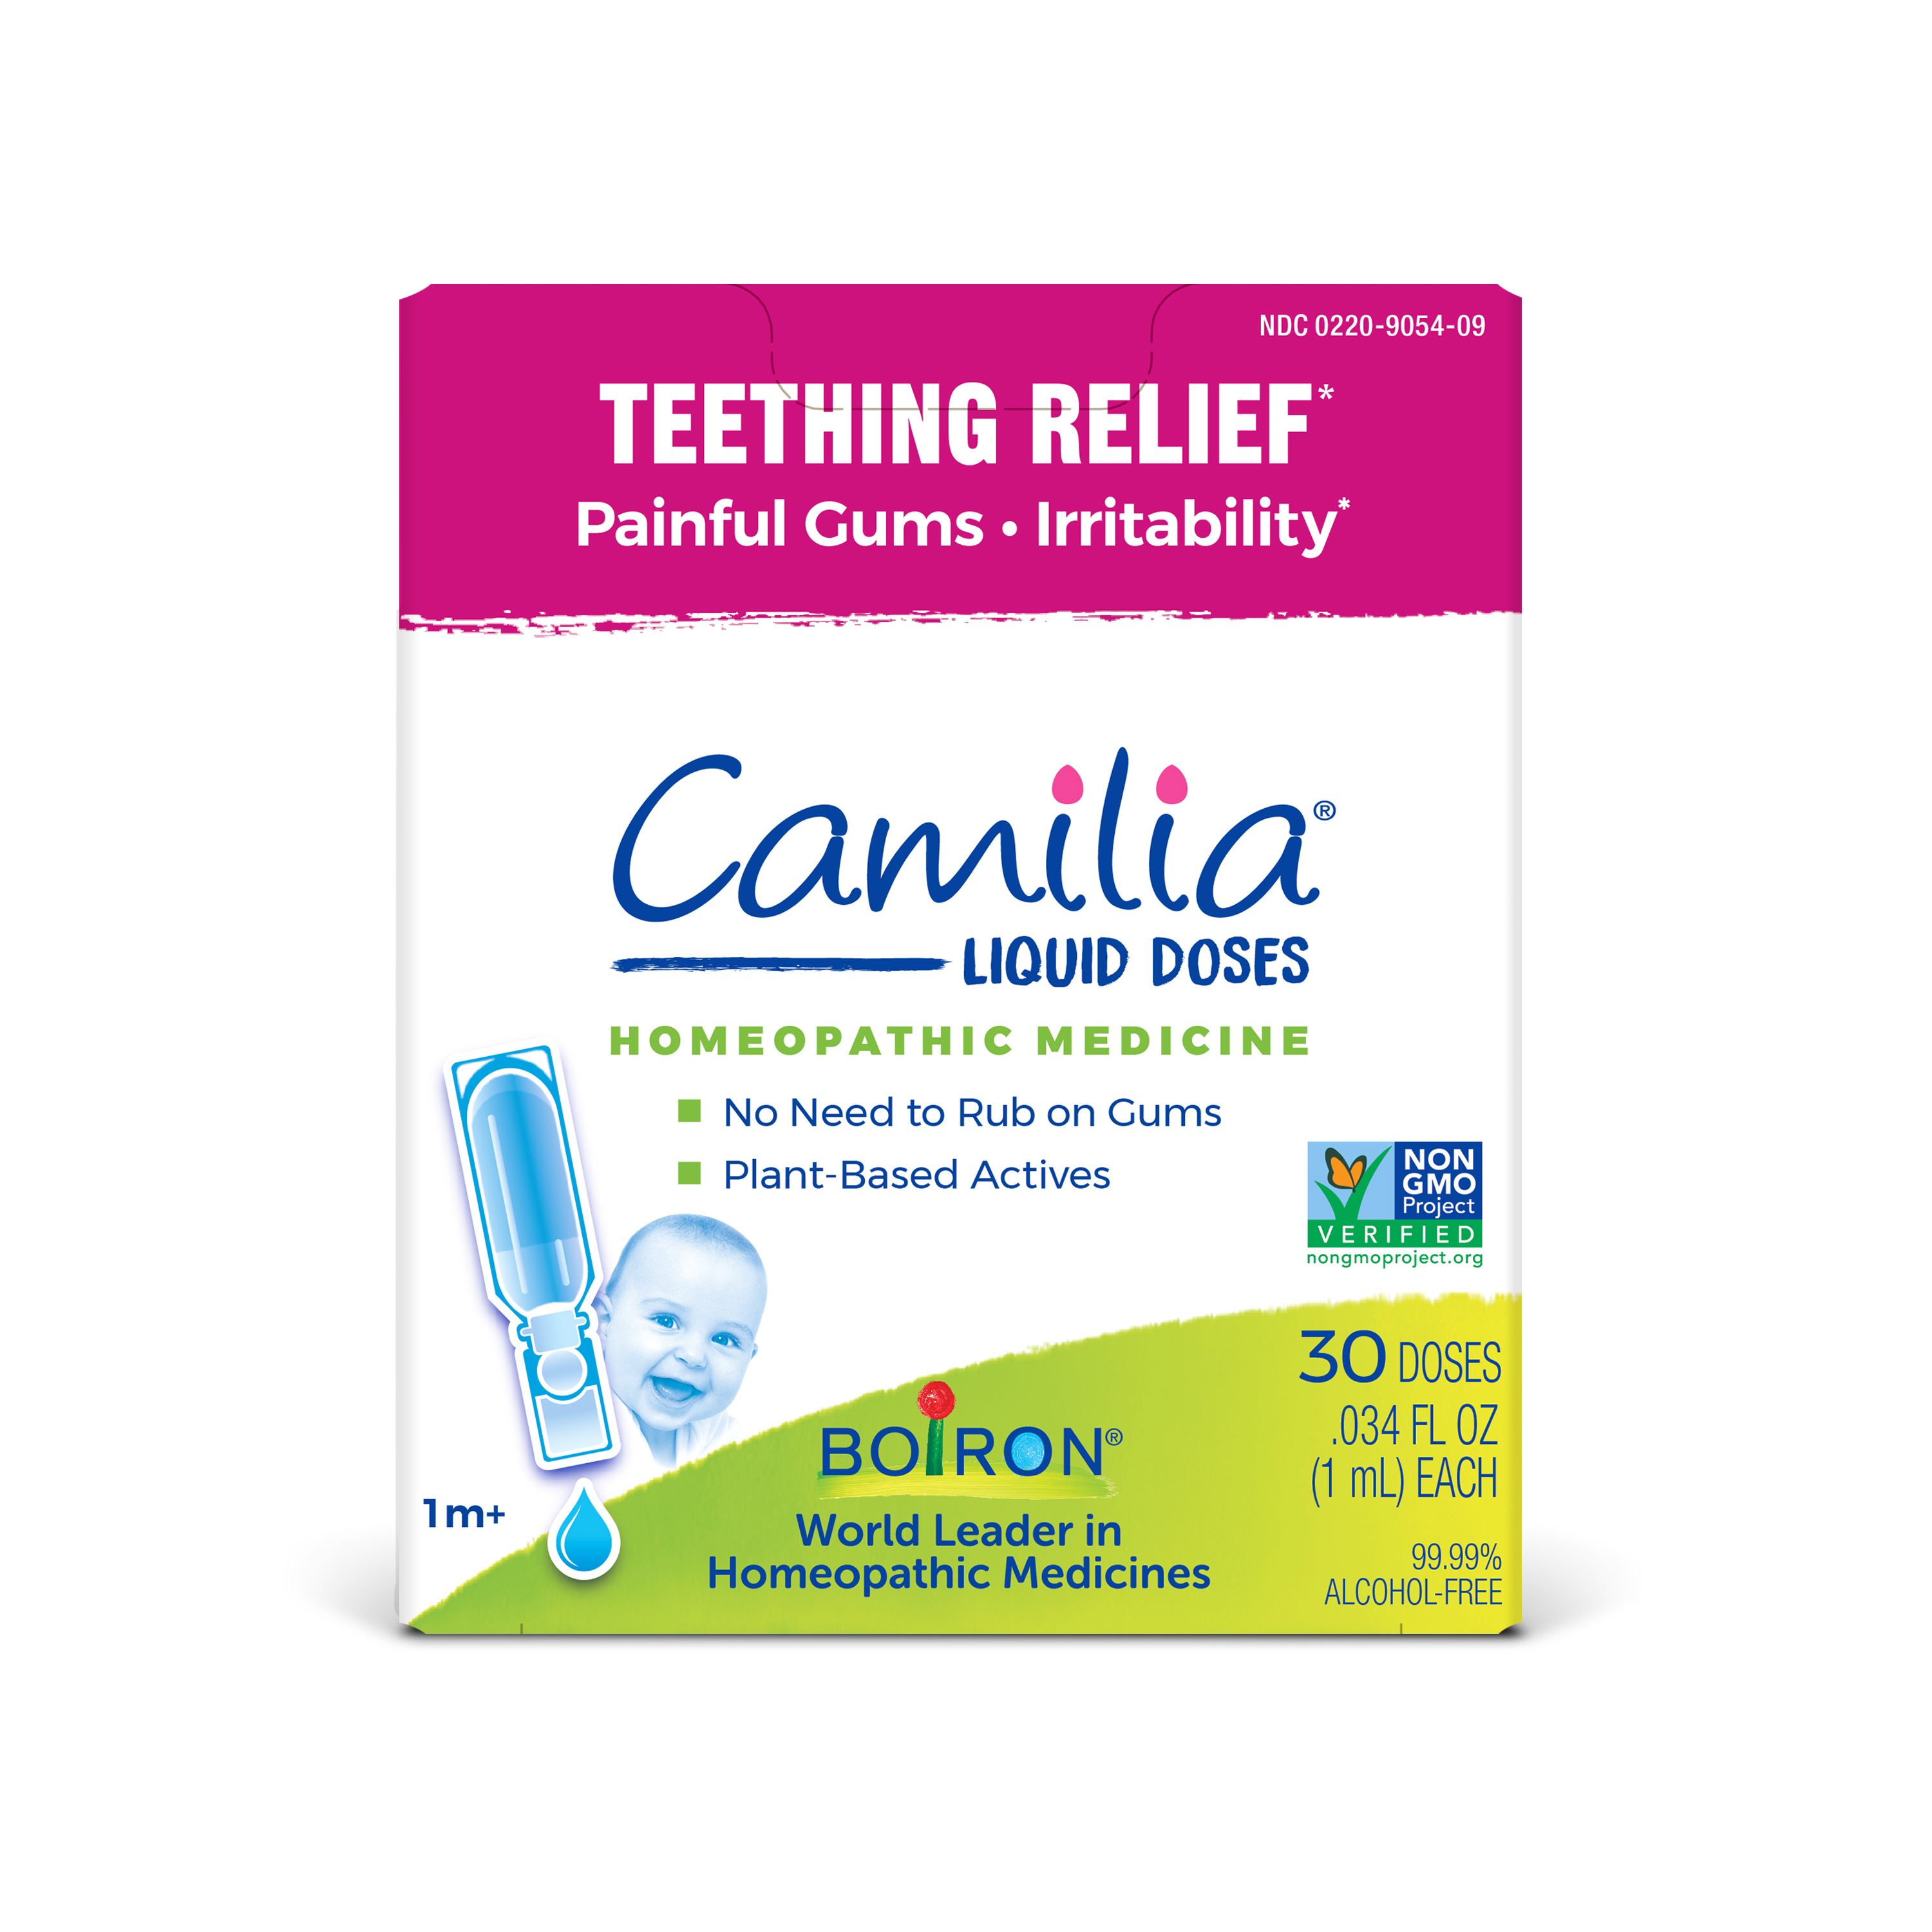 Boiron Camilia Teething Drops for Daytime and Nighttime Relief of Painful or Swollen Gums and Irritability in Babies, Irritability, 30 Single Liquid Doses - image 1 of 11